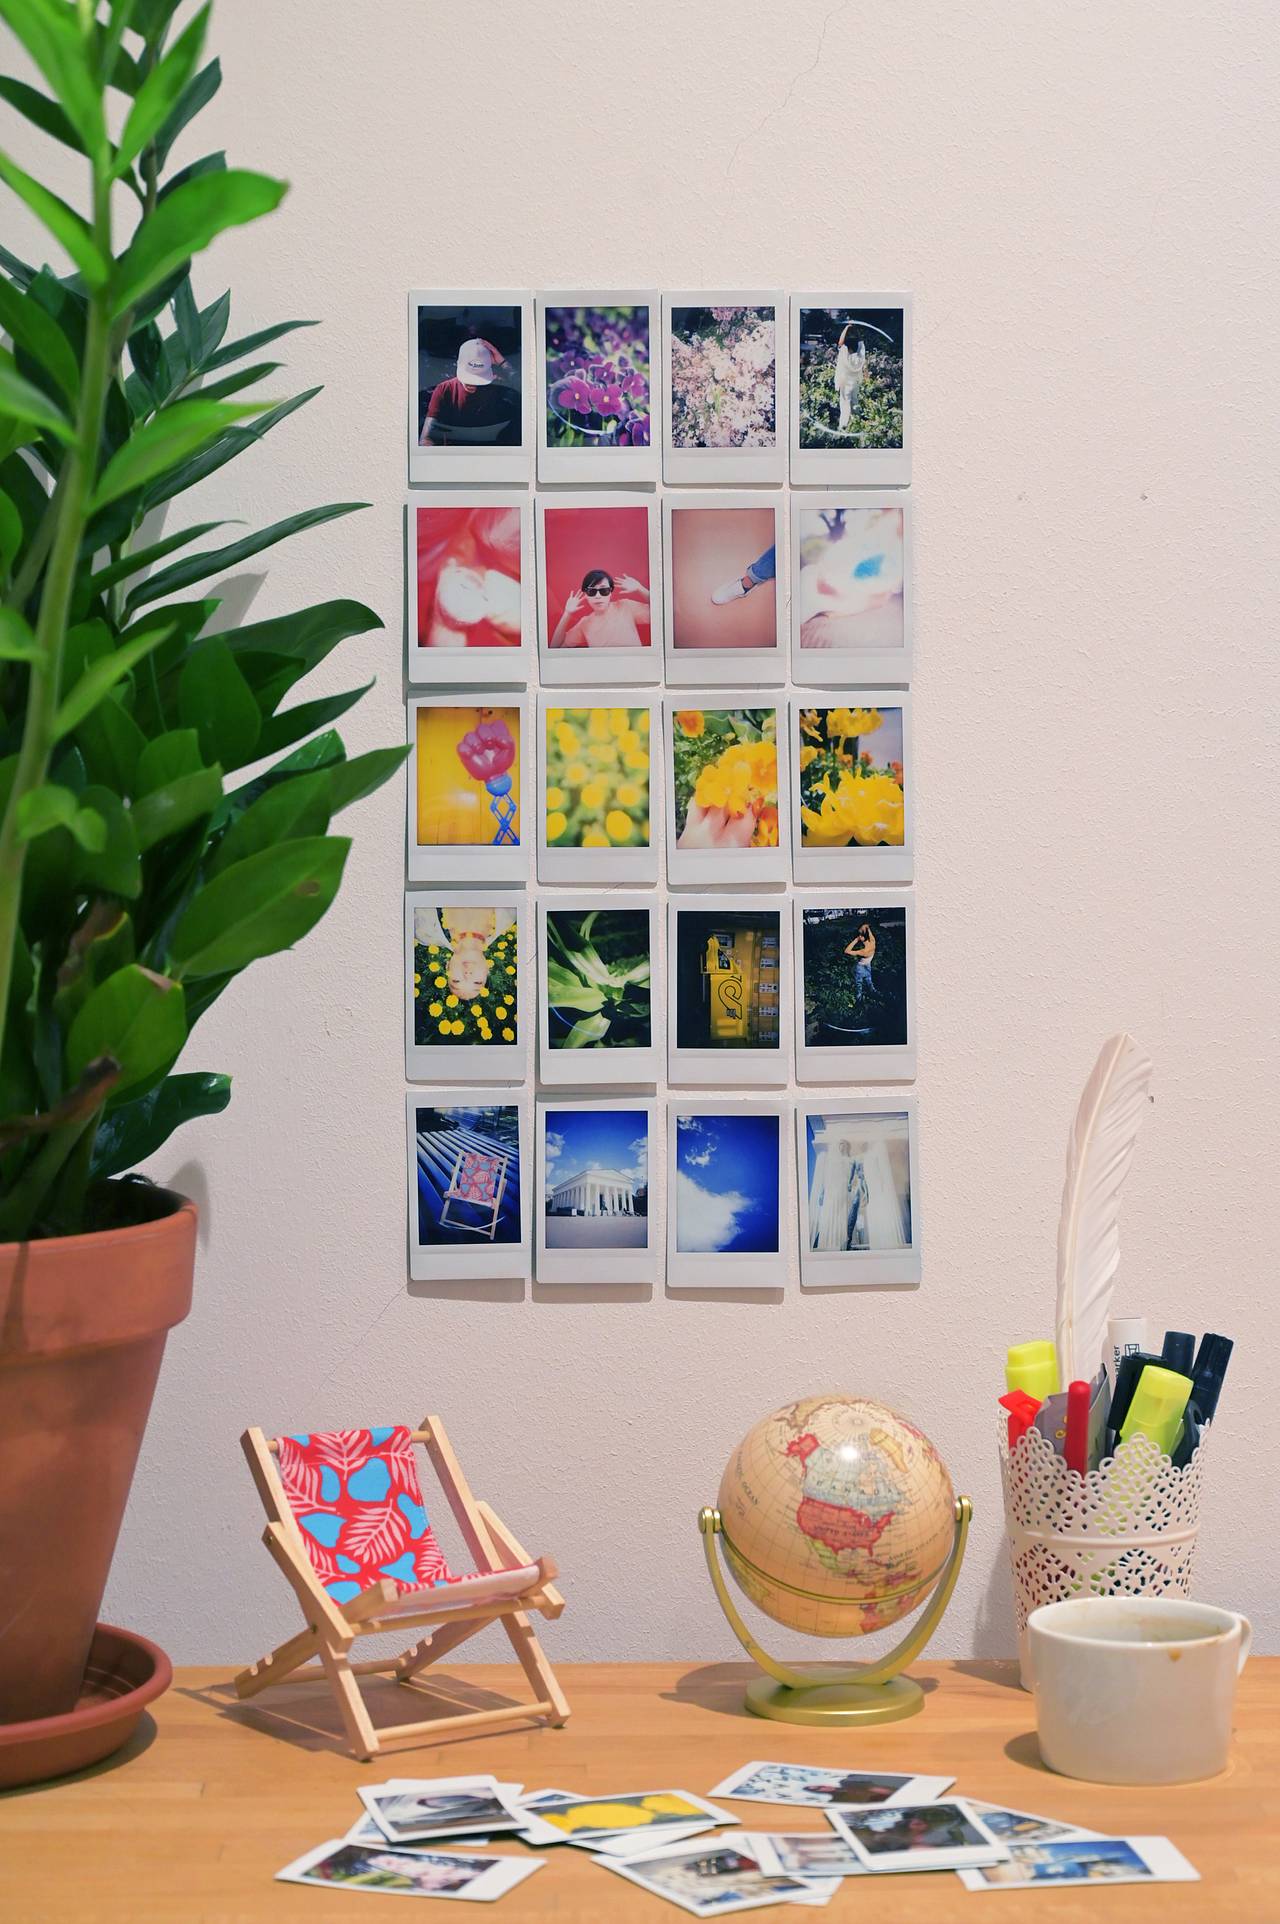 Fun display accessories including magnet stickers, glue dots and photo stands &amp; clips for easy sharing and presentation.